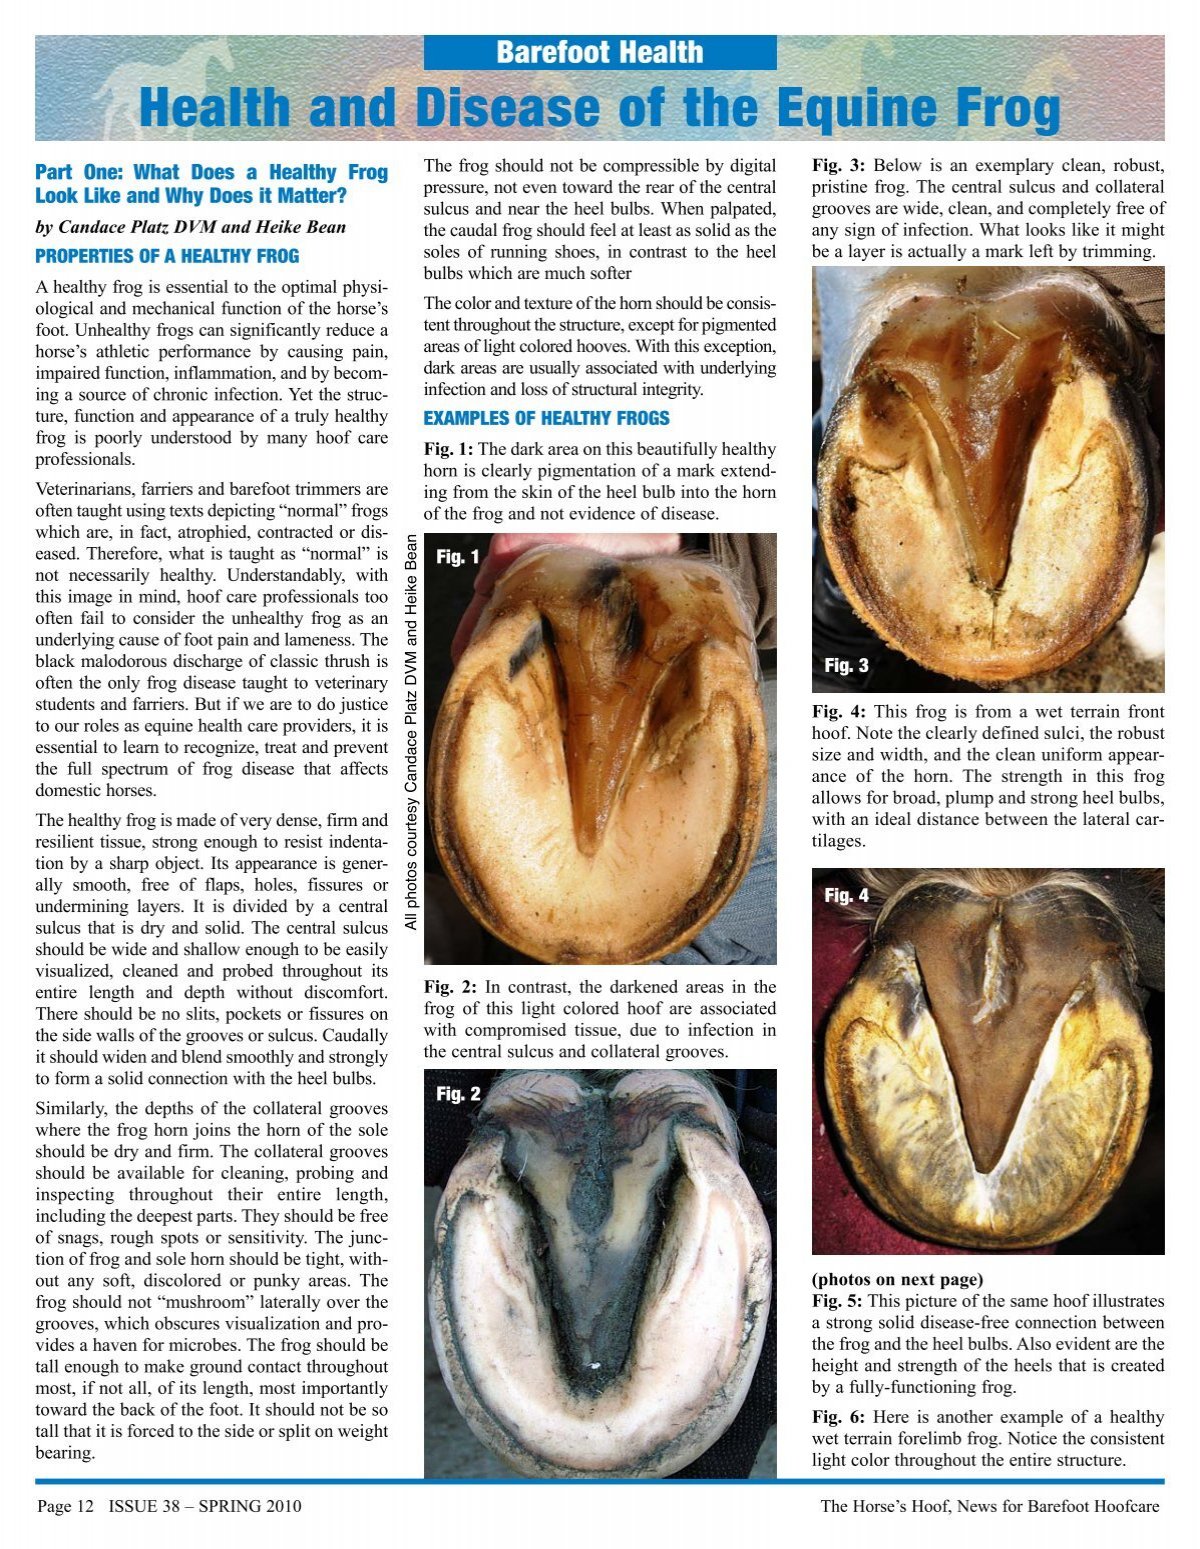 Health and Disease of the Equine Frog, Part - The Horse's Hoof